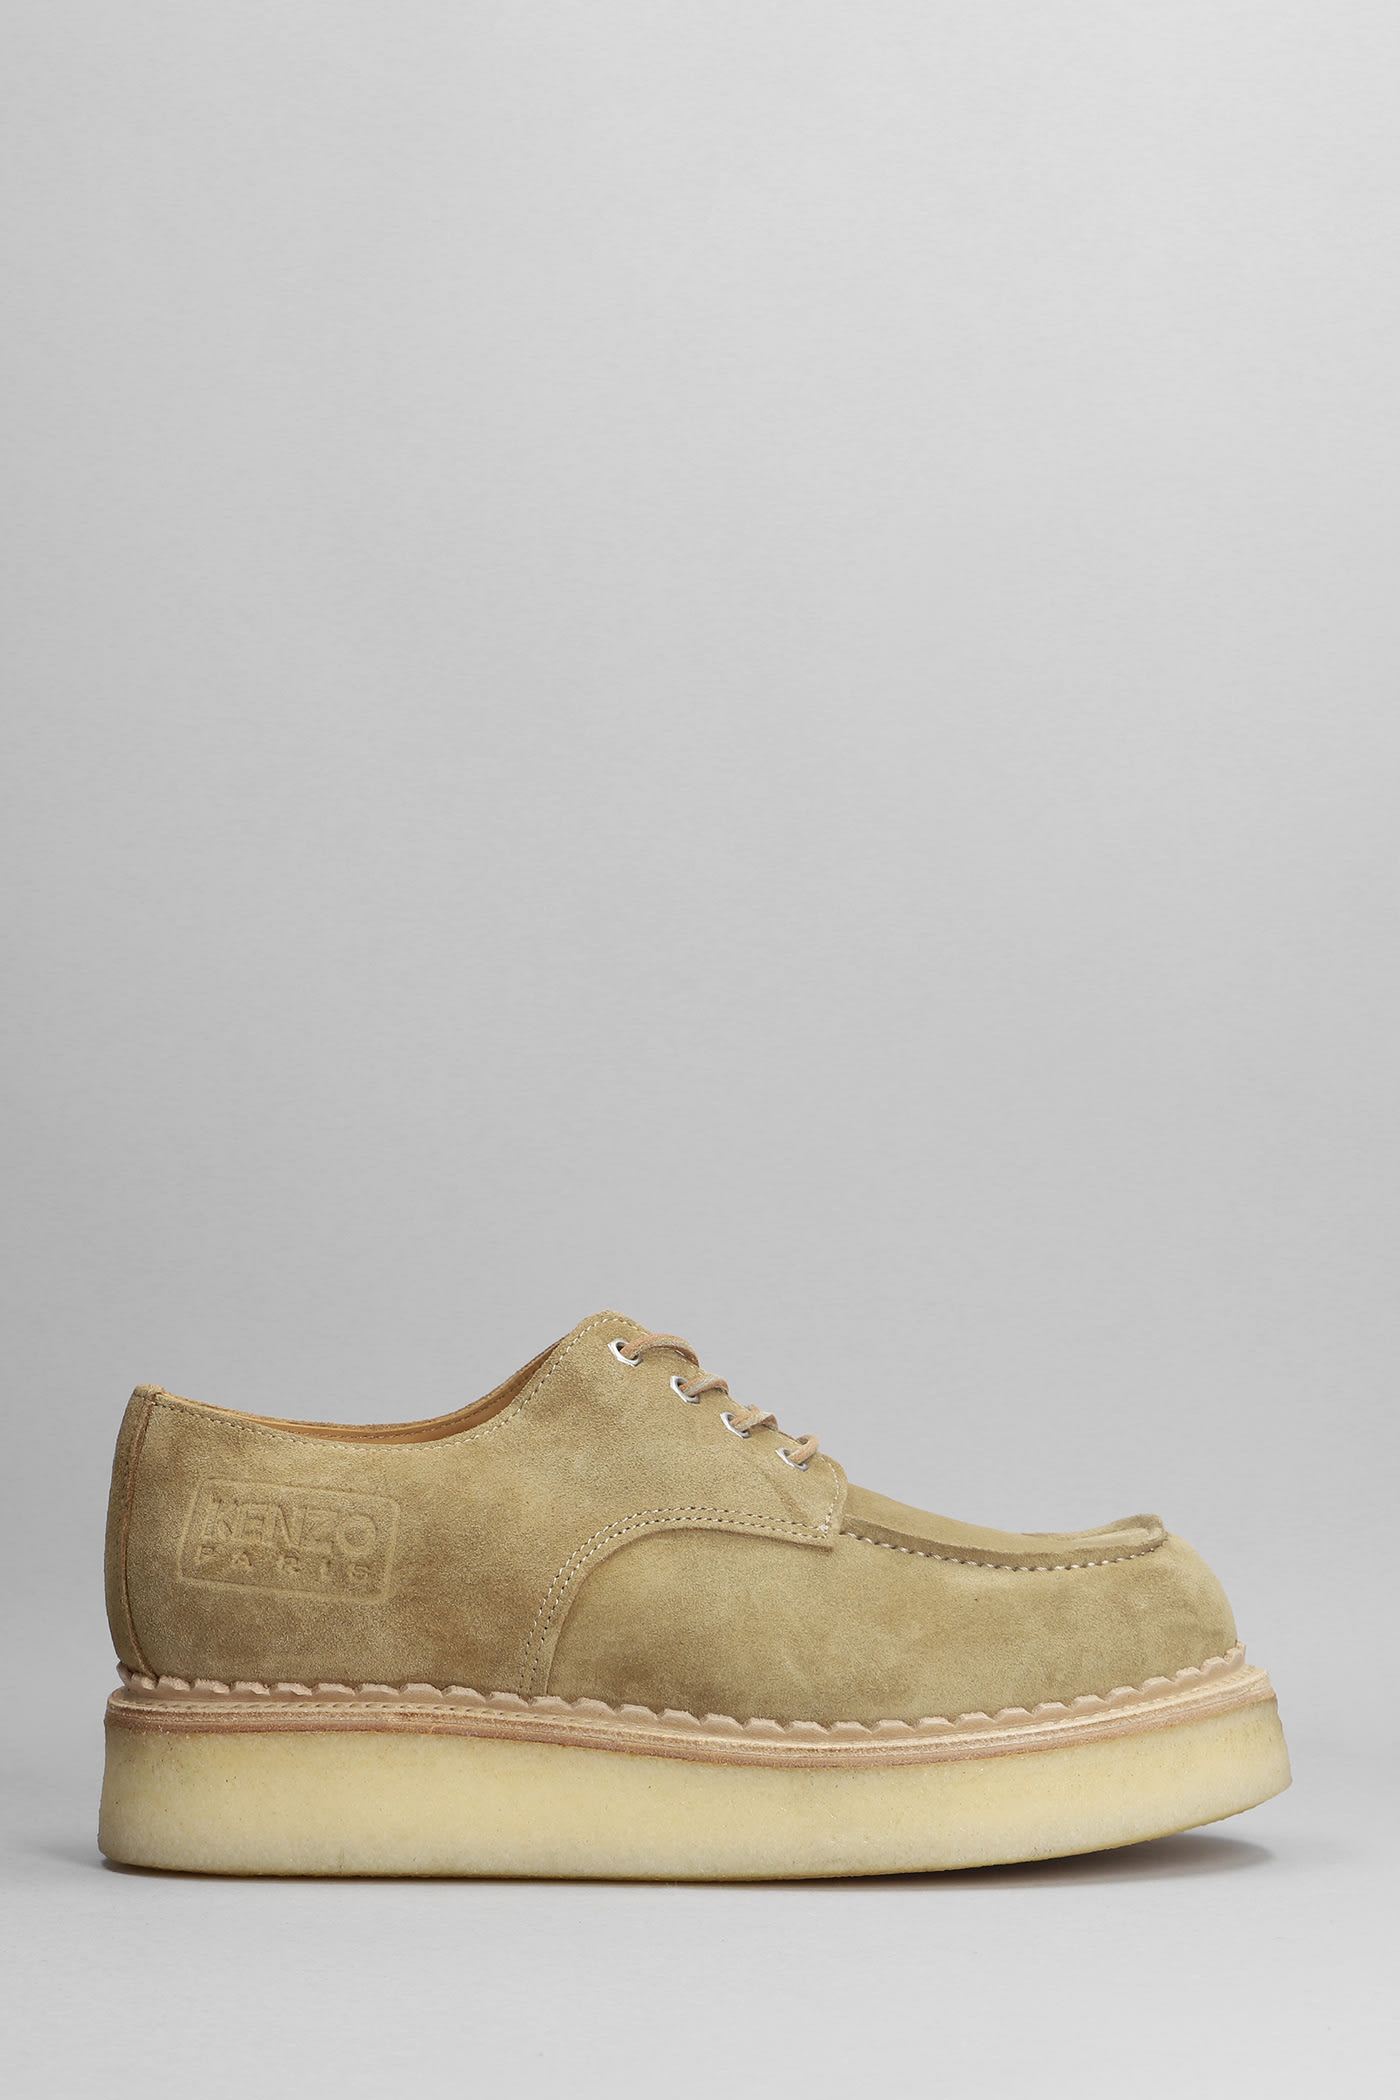 Kenzo Lace Up Shoes In Beige Suede